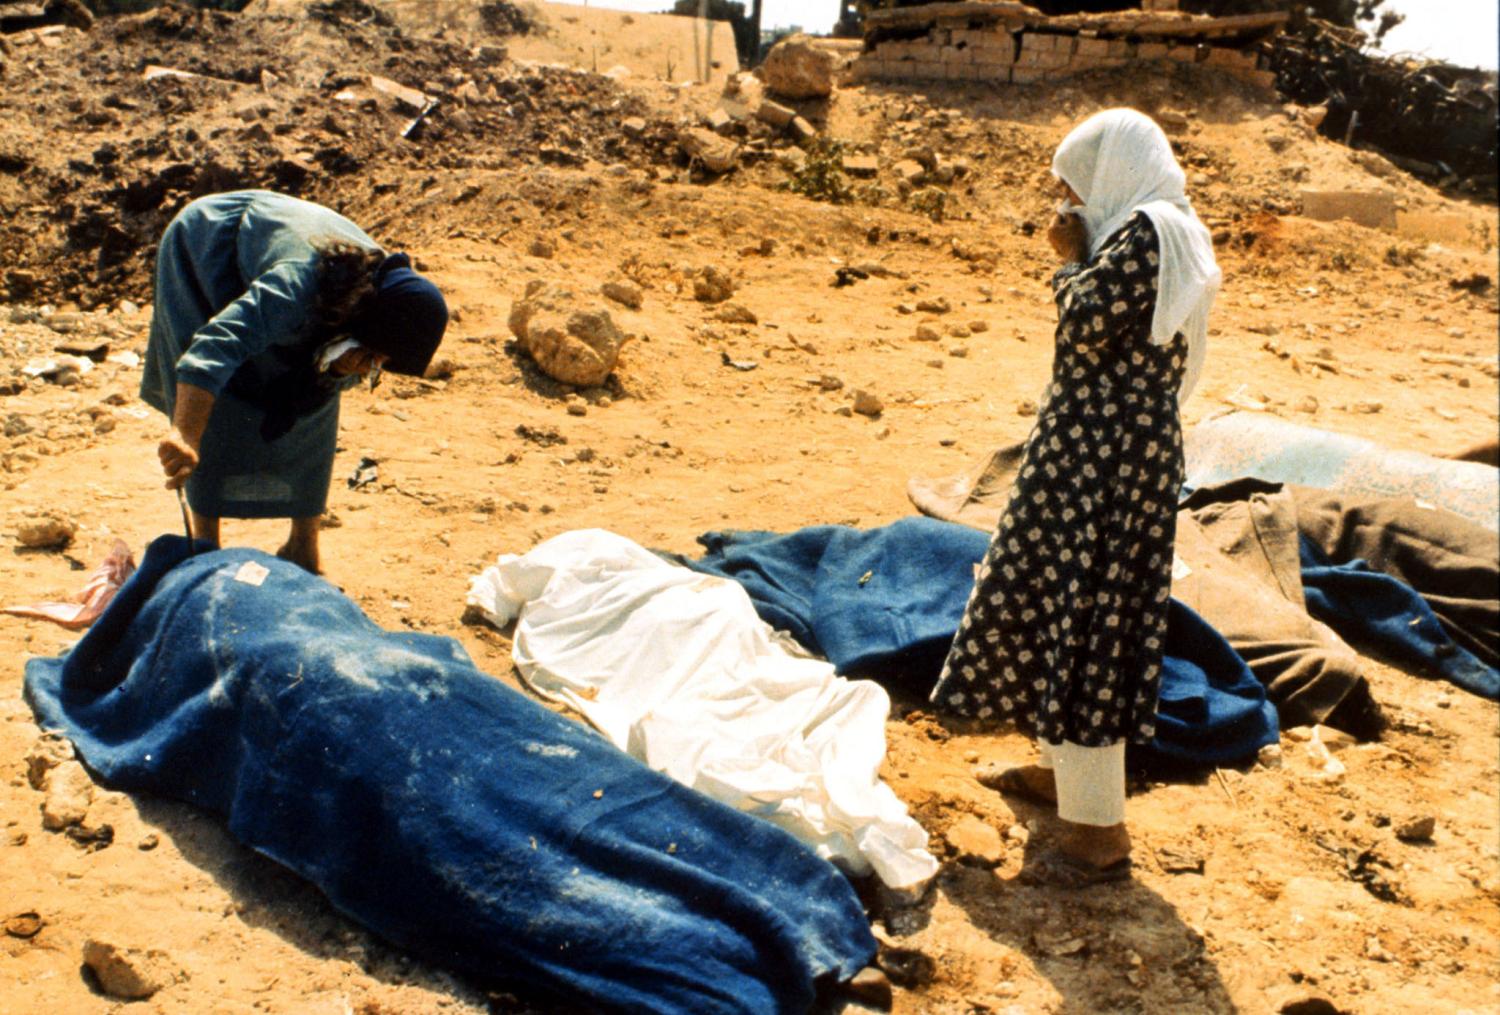 Two women inspect the bodies of the Sabra and Shatila massacre in this